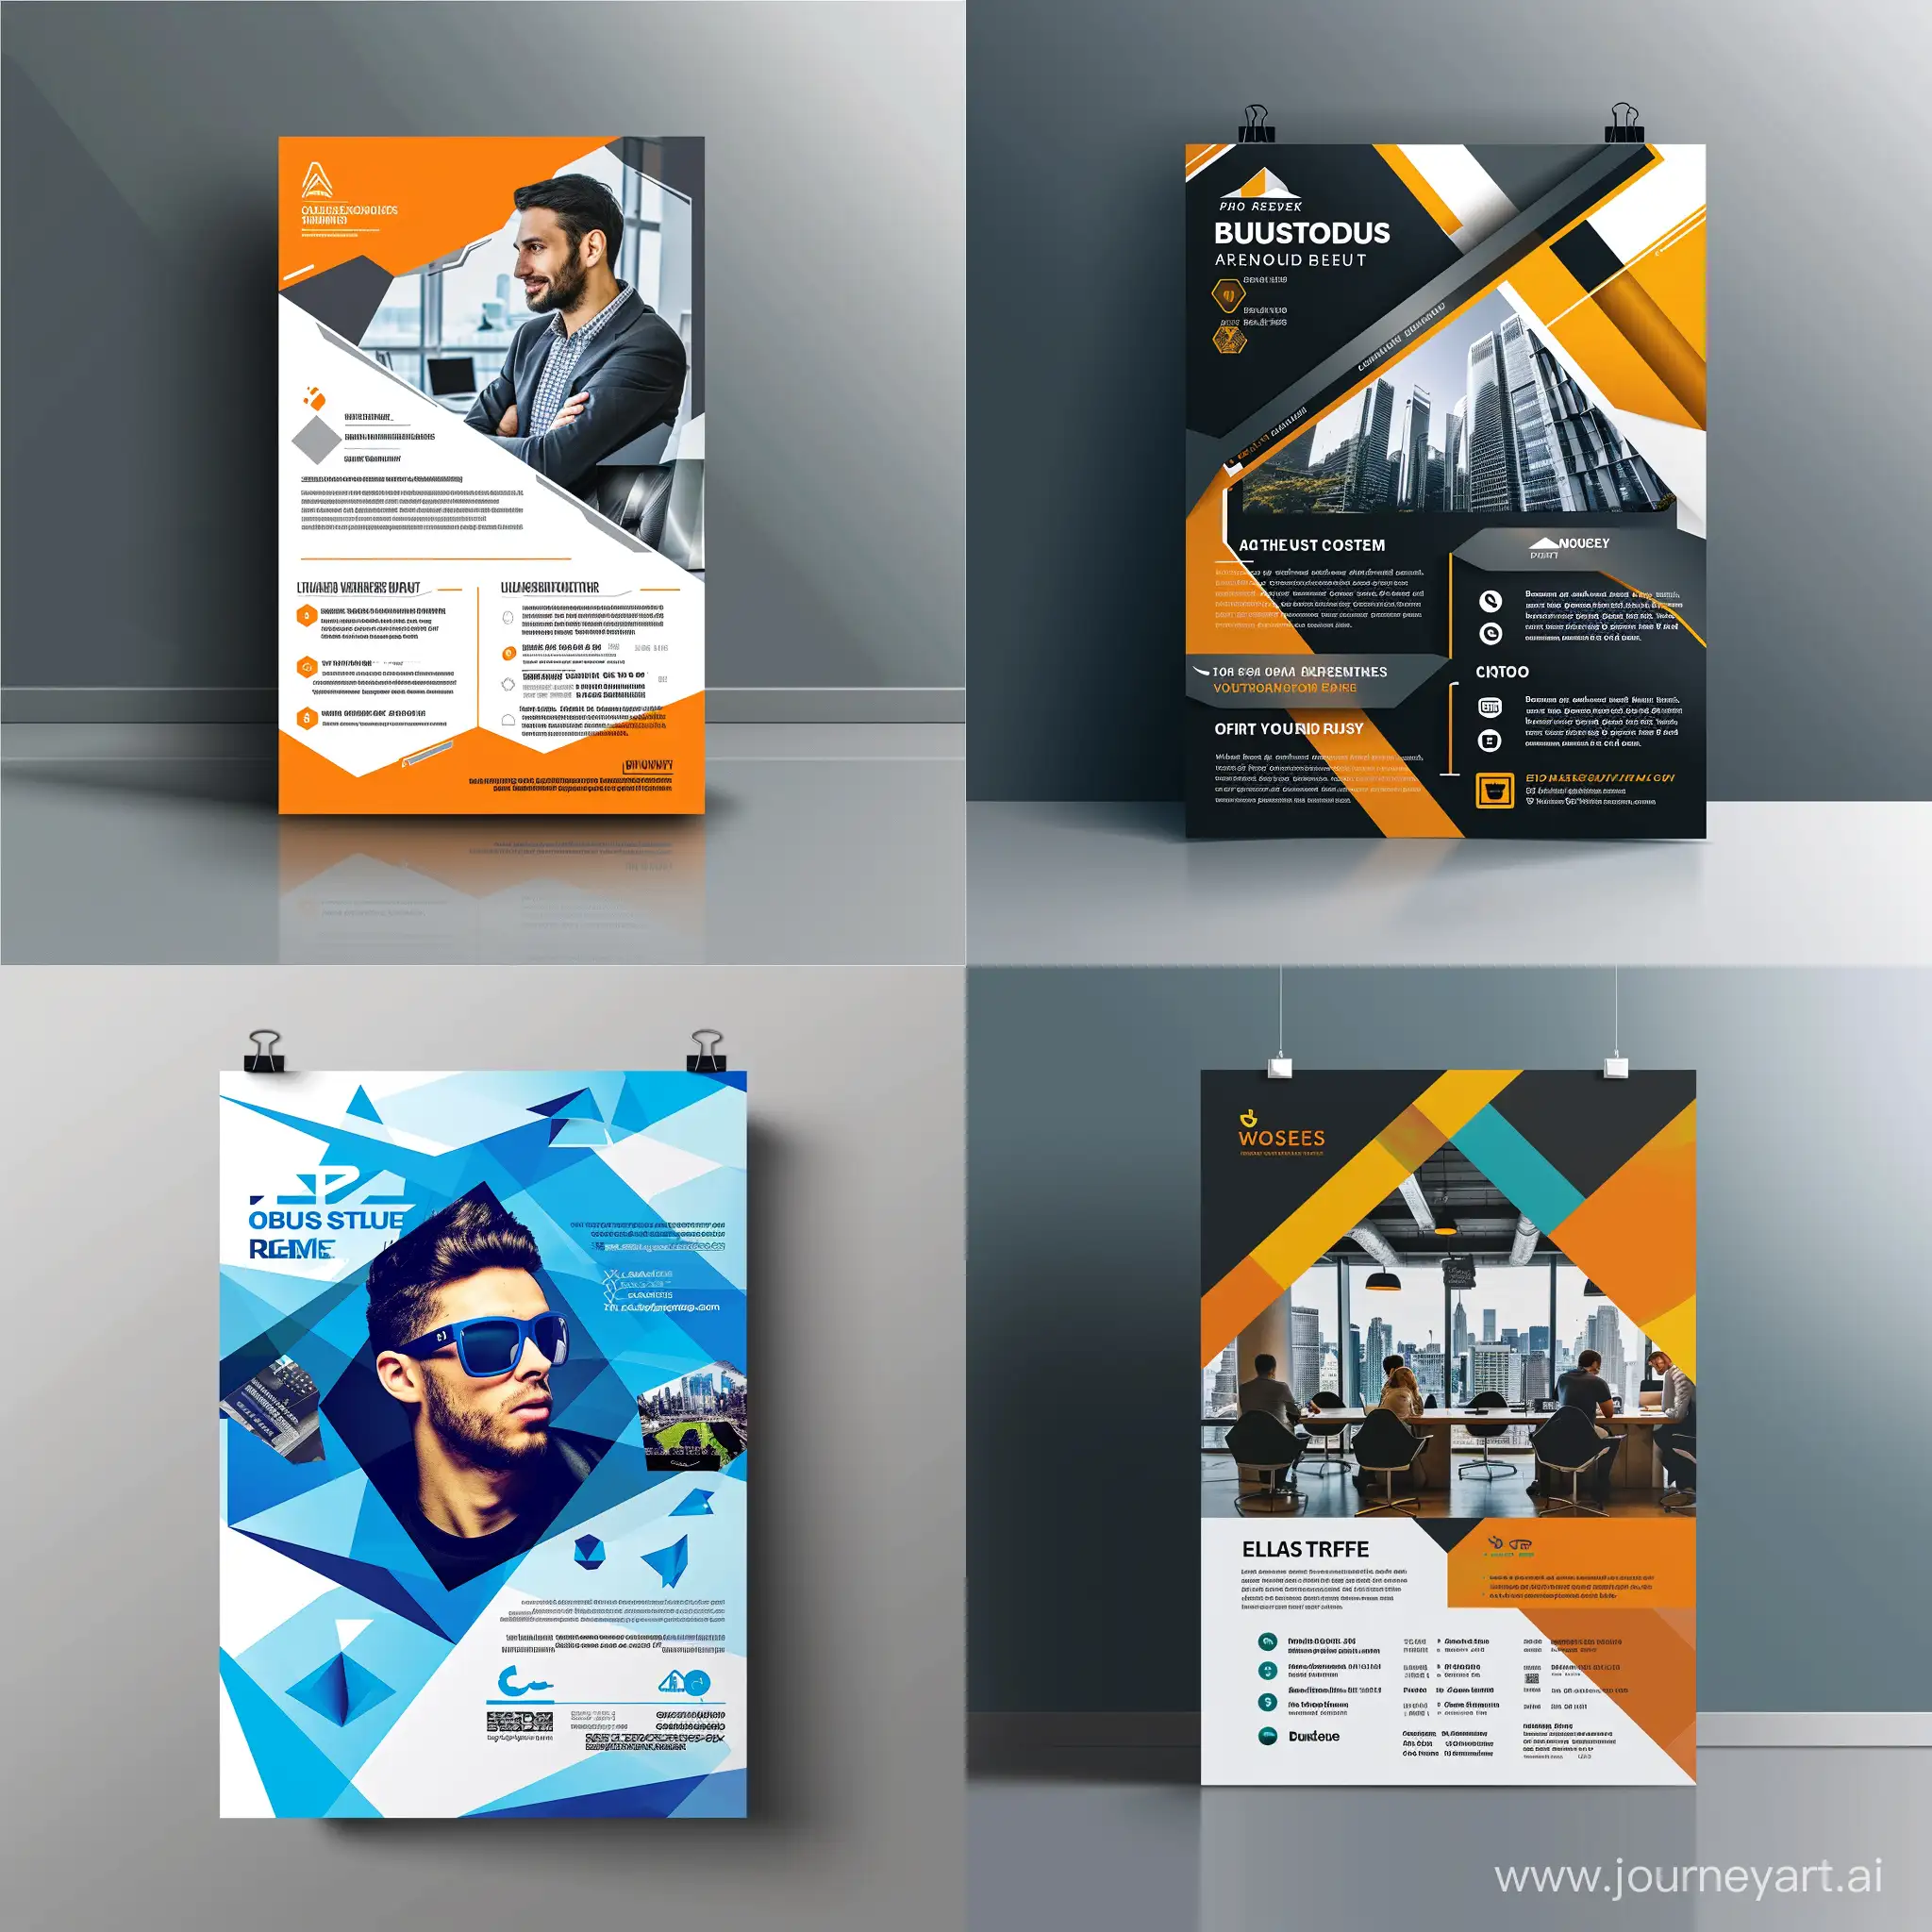 Professional-Business-Flyer-Design-with-Striking-Visuals